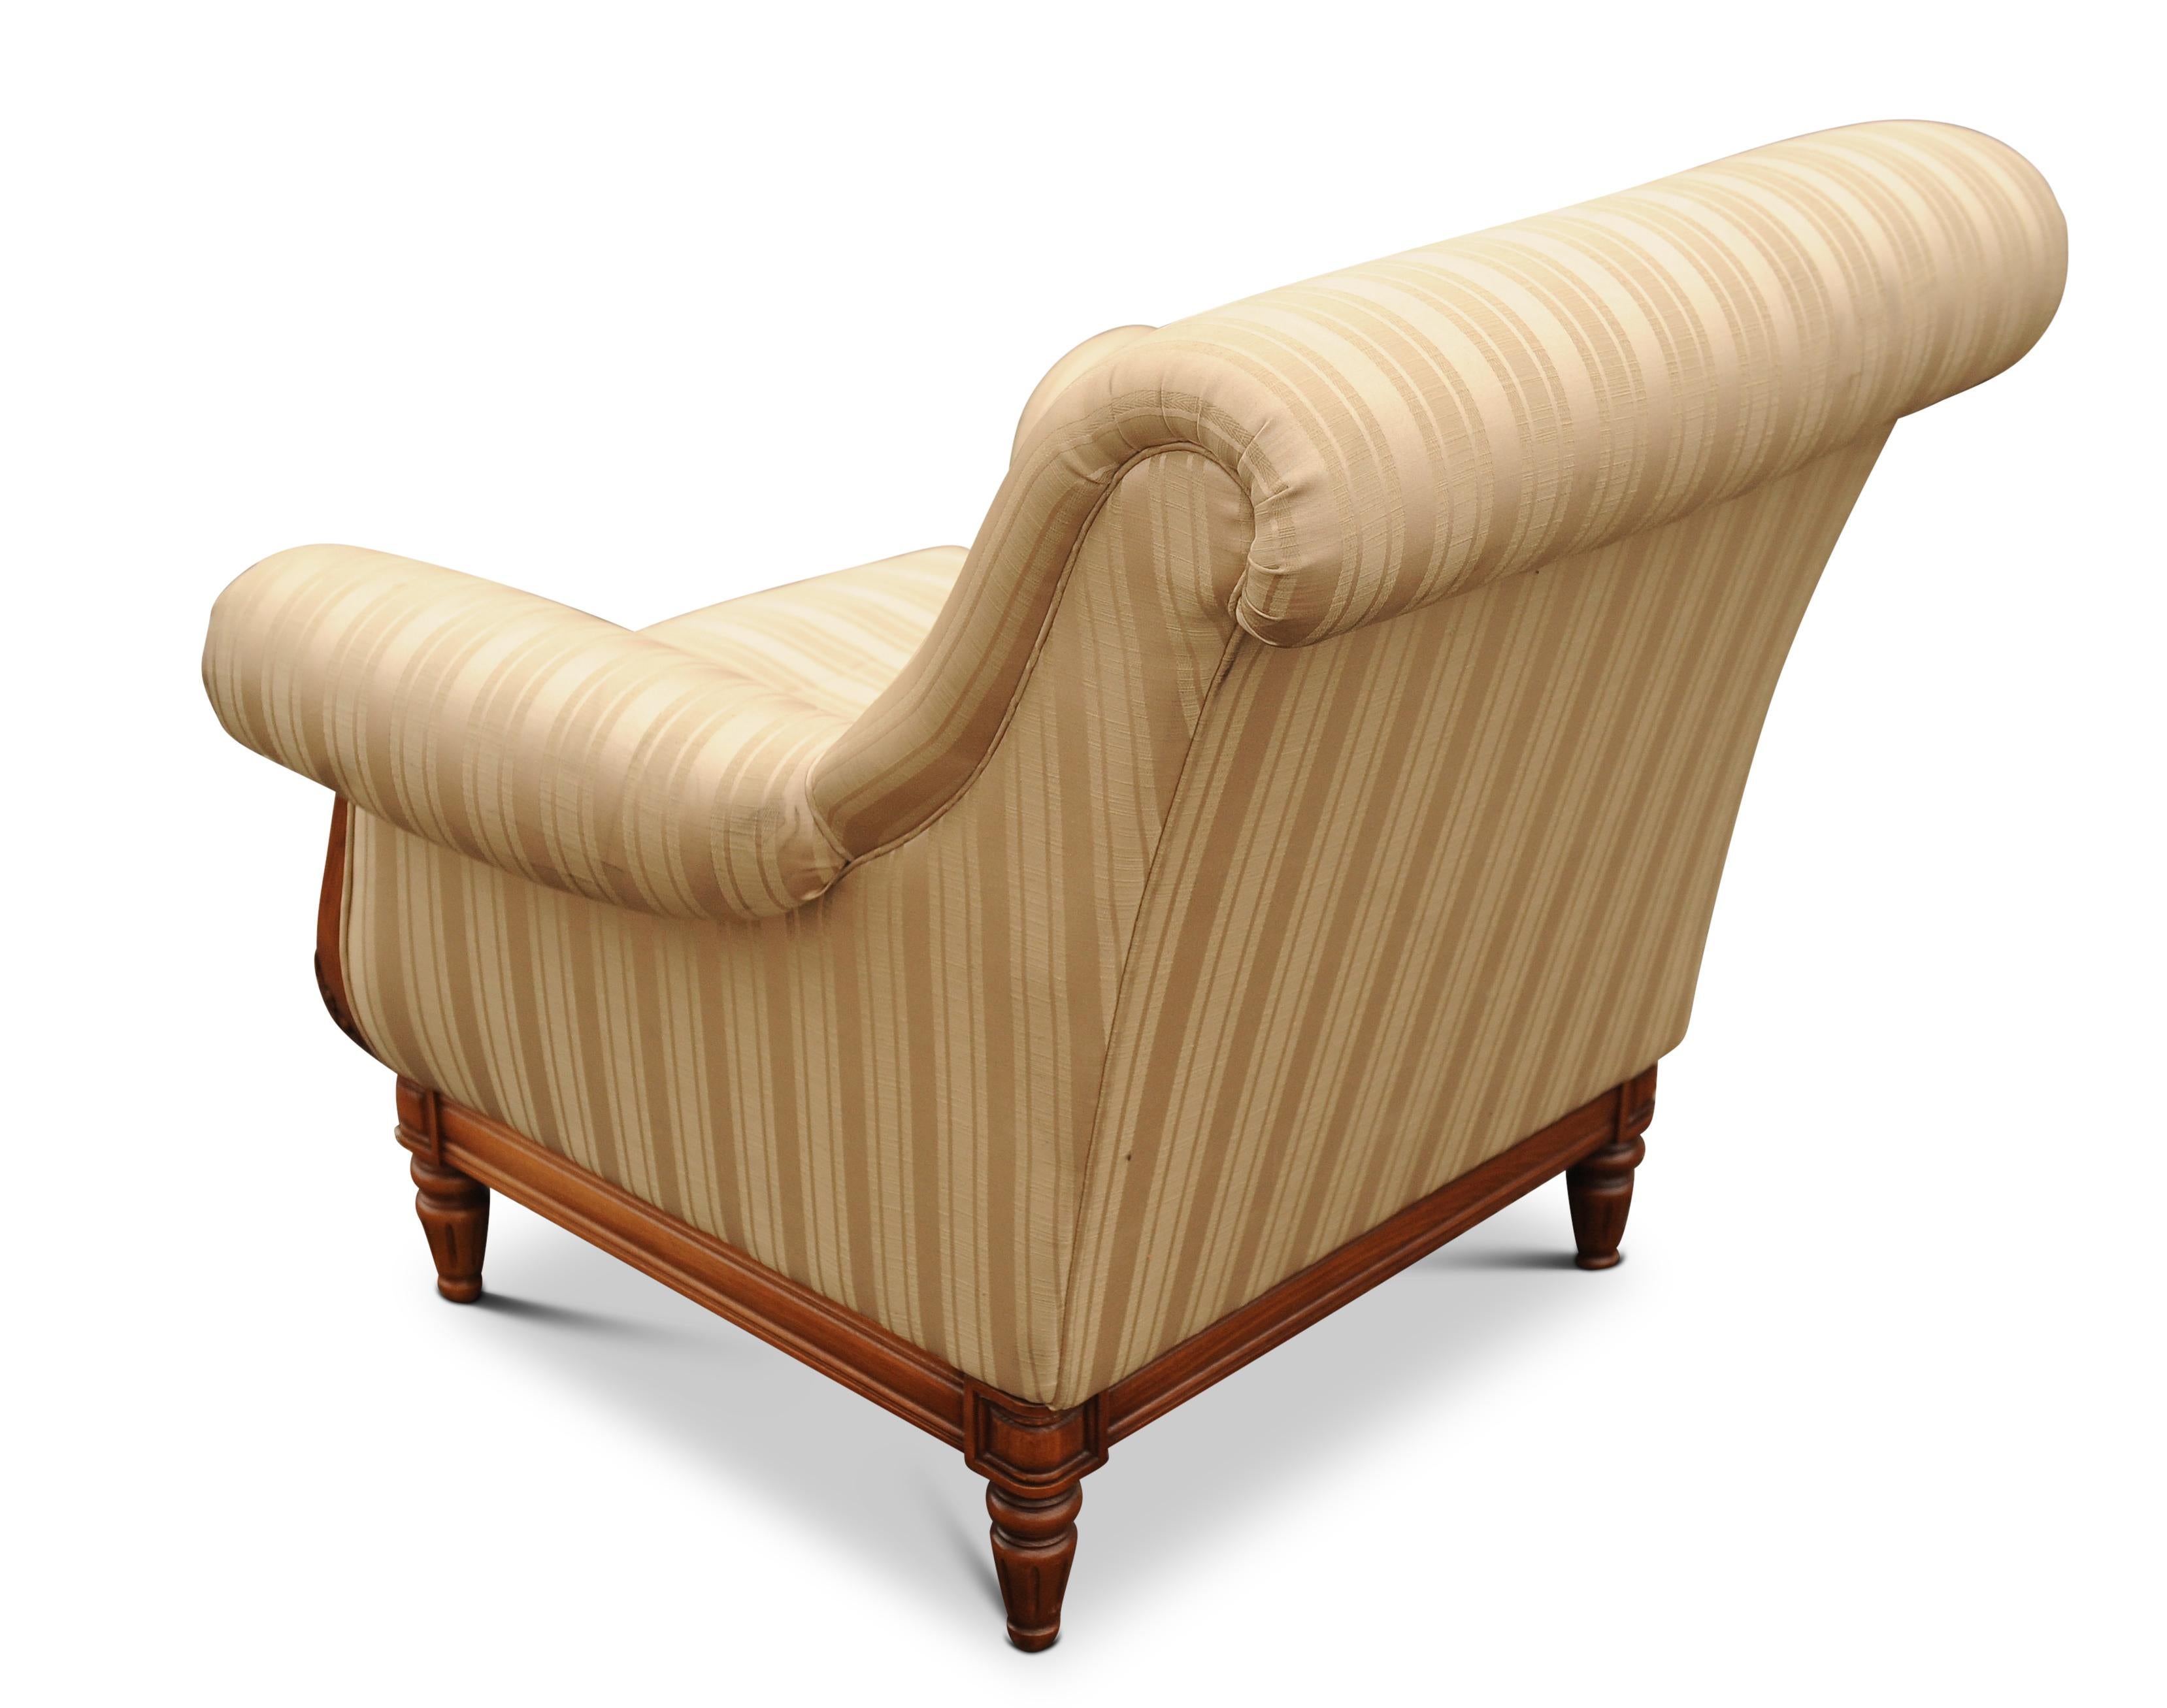 A William IV Empire Design Library Armchair Striped Cream Silk Upholstery In Good Condition For Sale In High Wycombe, GB